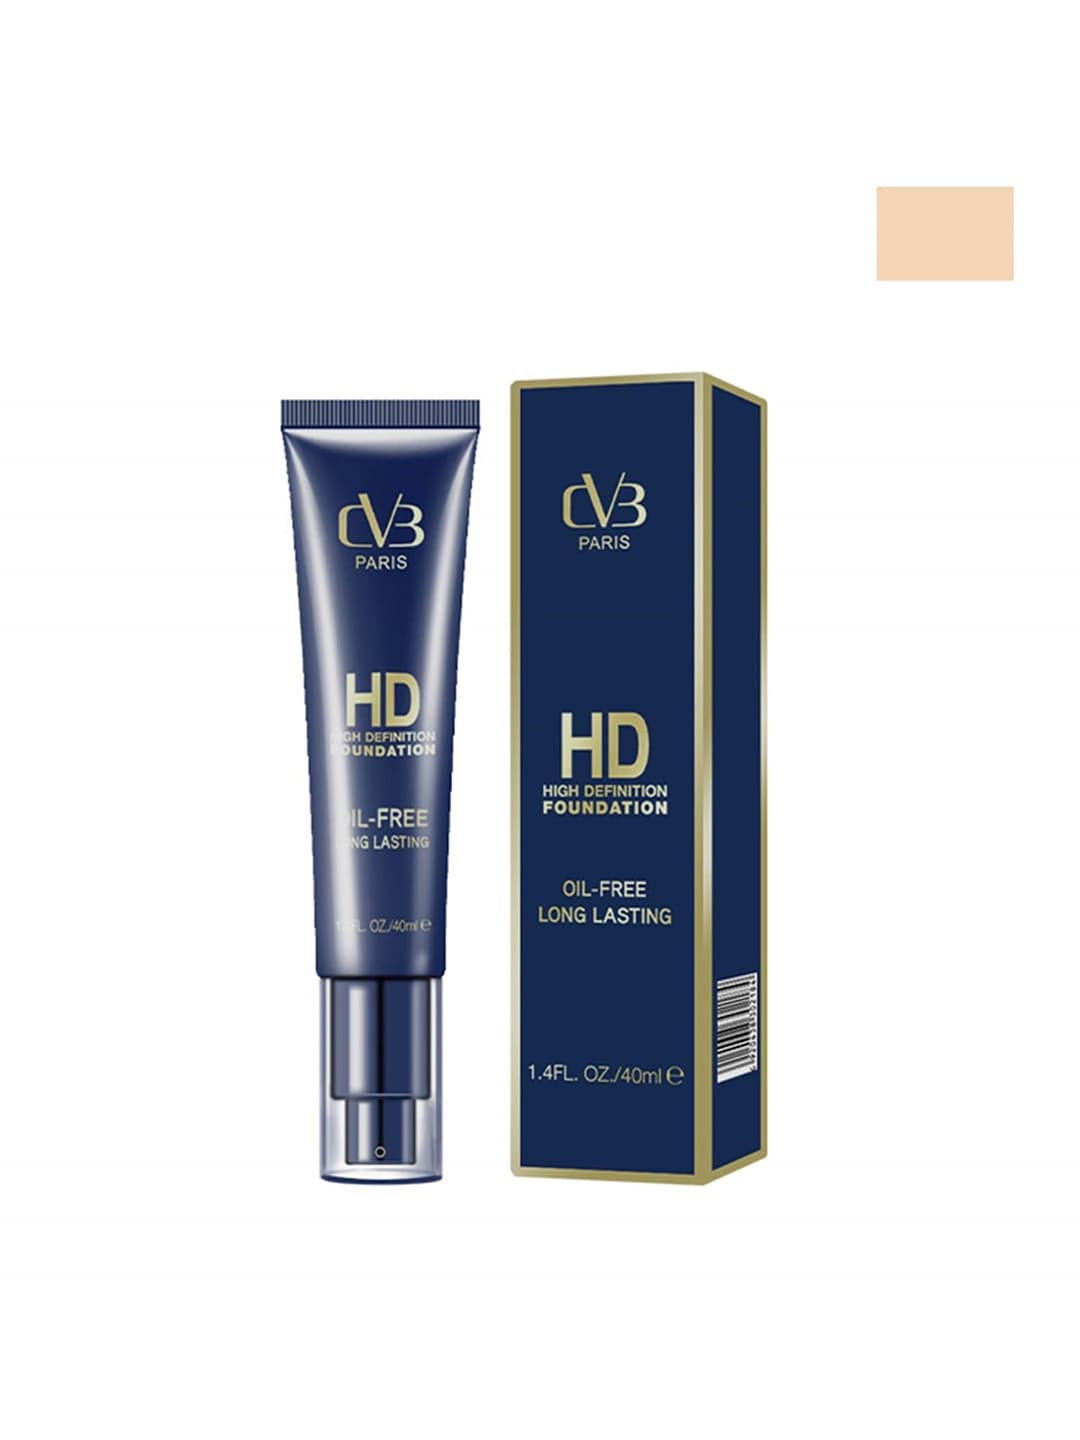 CVB High Definition Oil Free Long Lasting Foundation 40 ml - Shade 2 Price in India